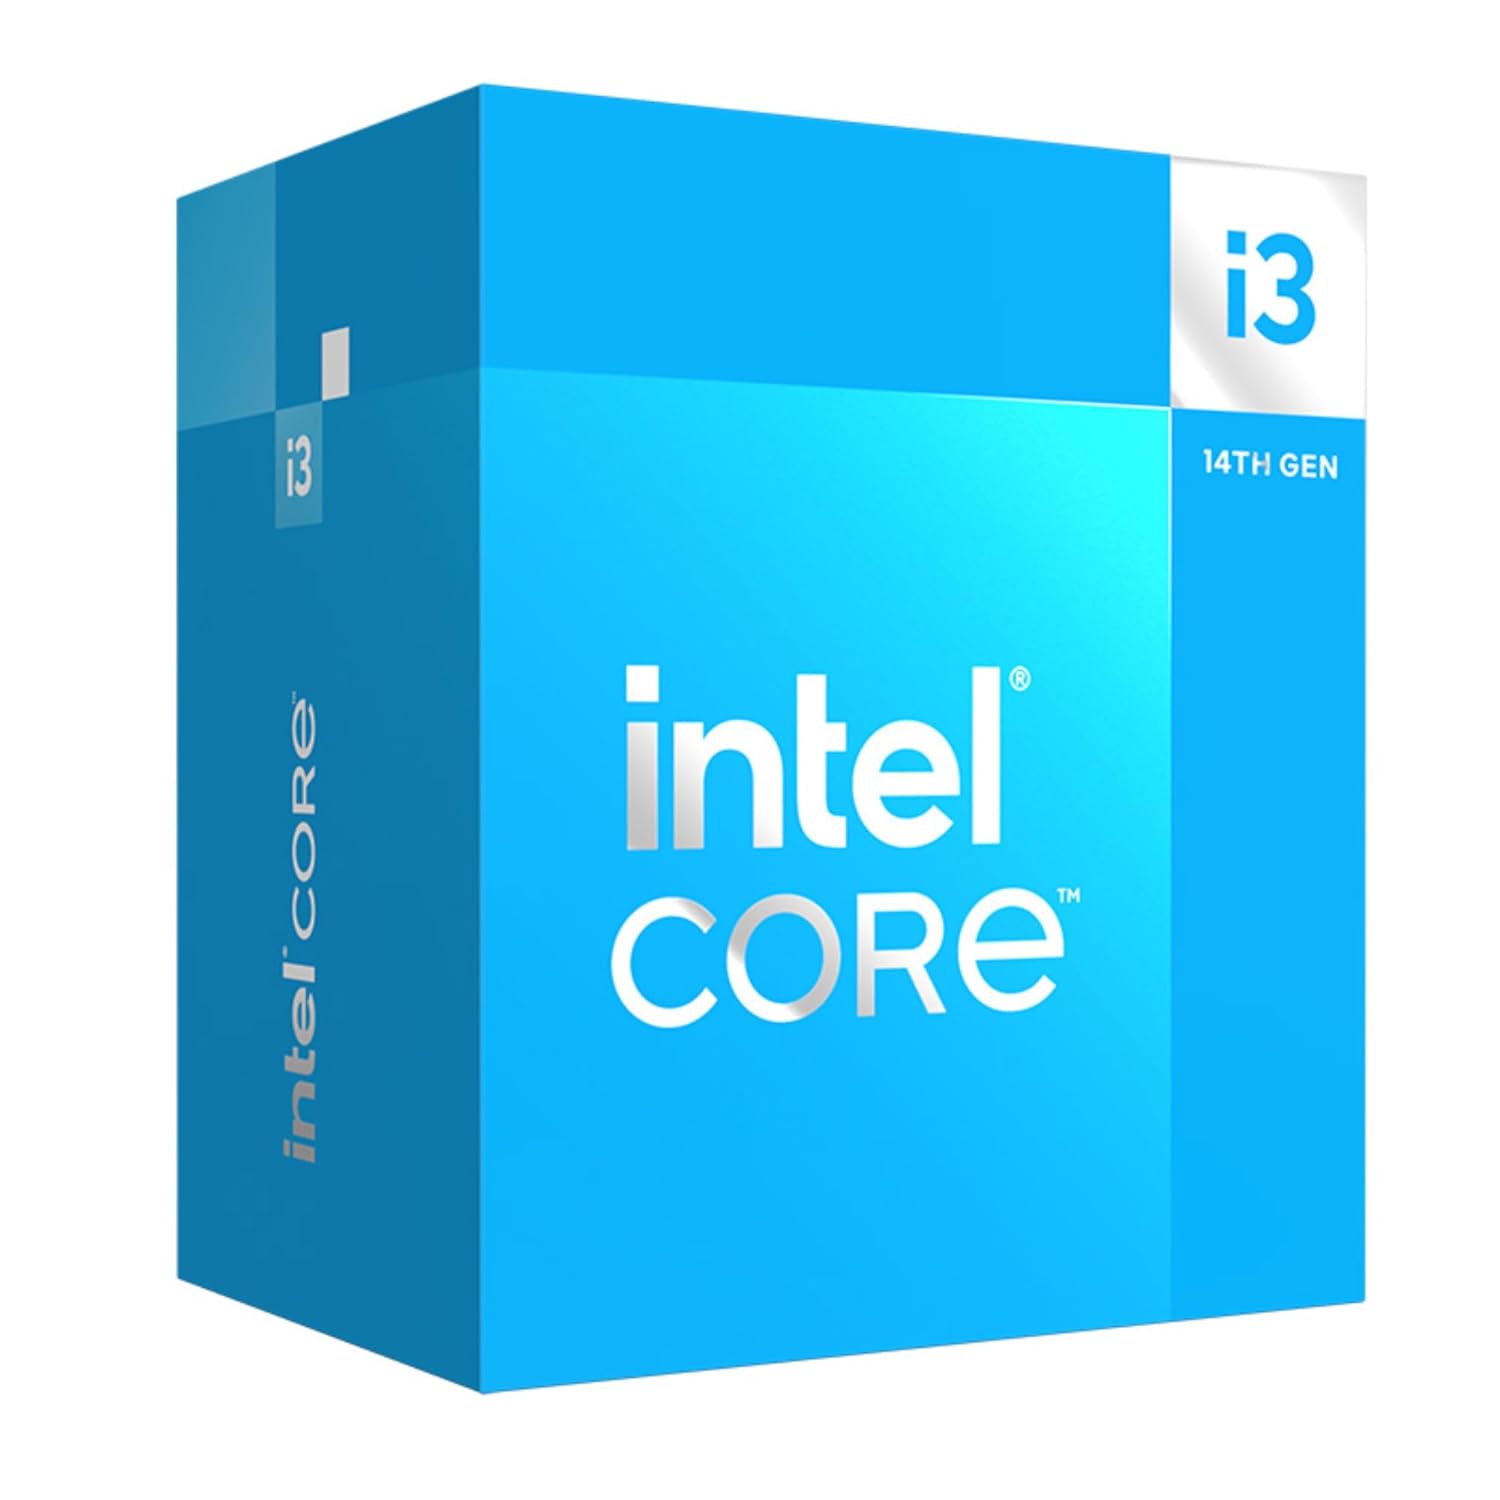 Intel Core i3-14100 Processor with Turbo Boost Technology Up to 4.7 GHz, Intel UHD Graphics 730, DDR5-4800/DDR4-3200 Memory, LGA-1700 Socket, and ECC Unsupported by INTEL